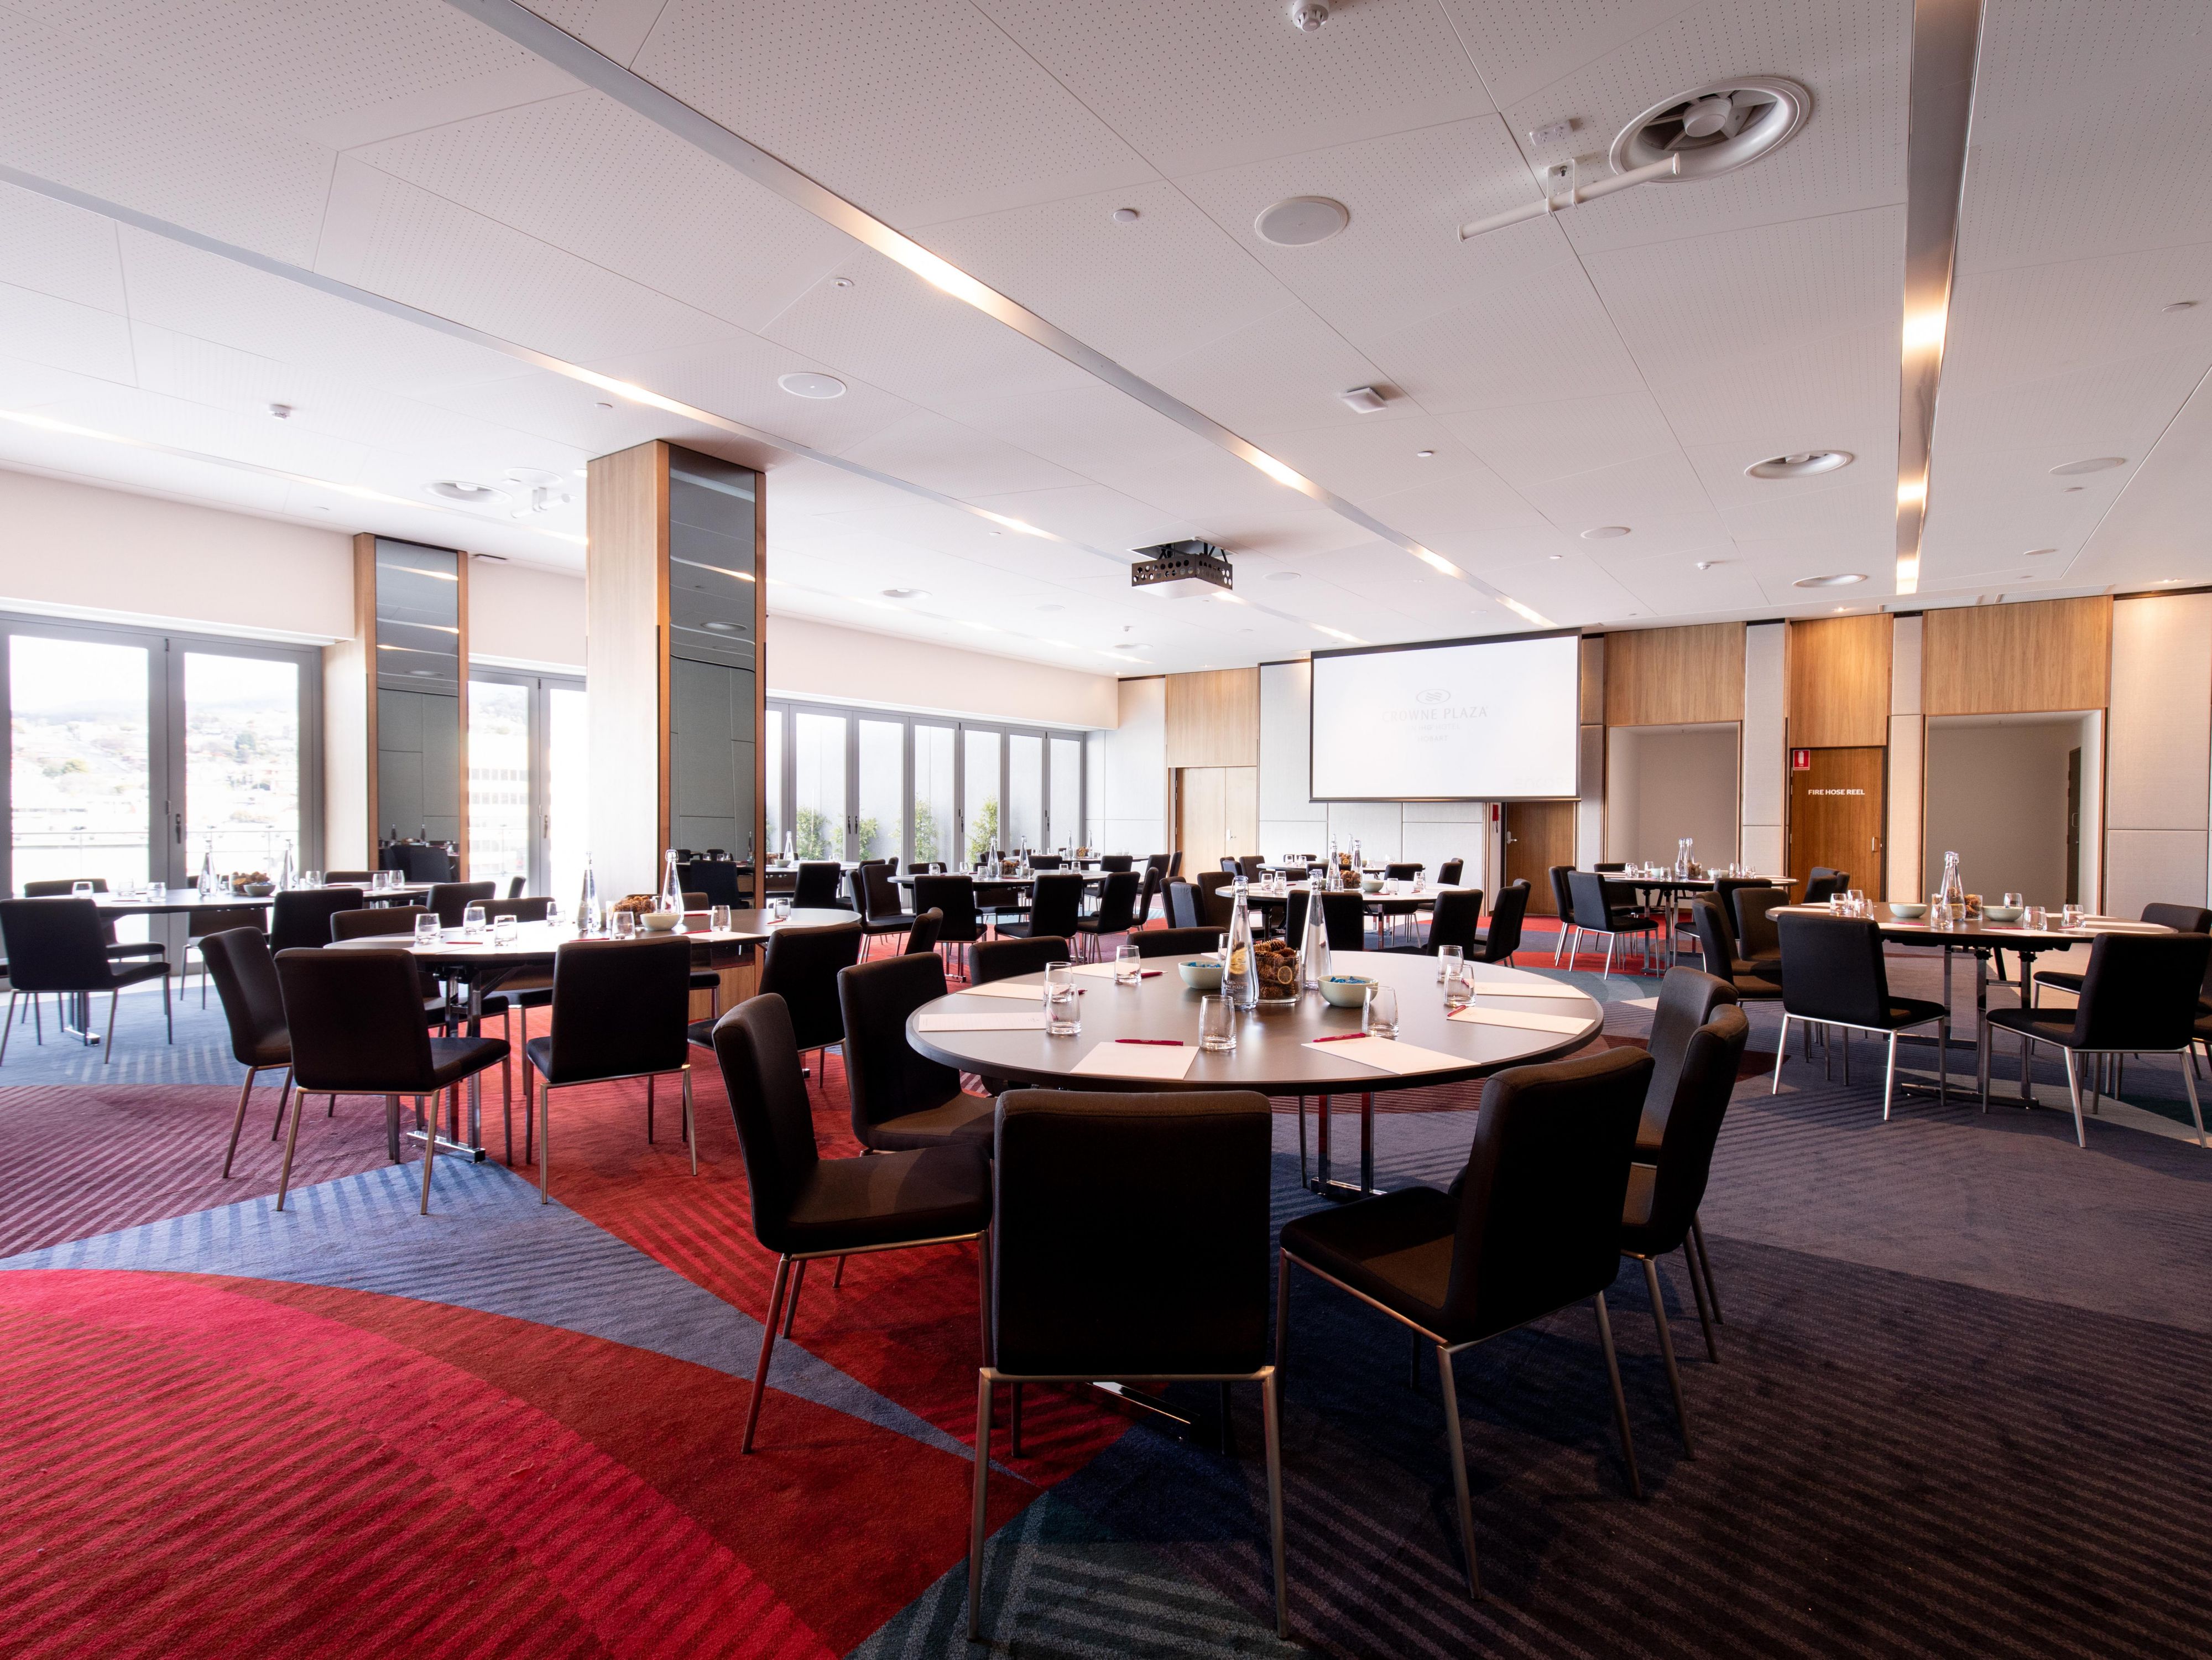 Crowne Plaza Hobart is the perfect hub for corporate or social events. We understand that the conference hall is not your destination; it's your starting point. Our spaces include a ballroom that comfortably fits 30 round tables with a stage or 500 people with theatre setting. Featuring unique spaces such as The Deck and our outdoor courtyard.